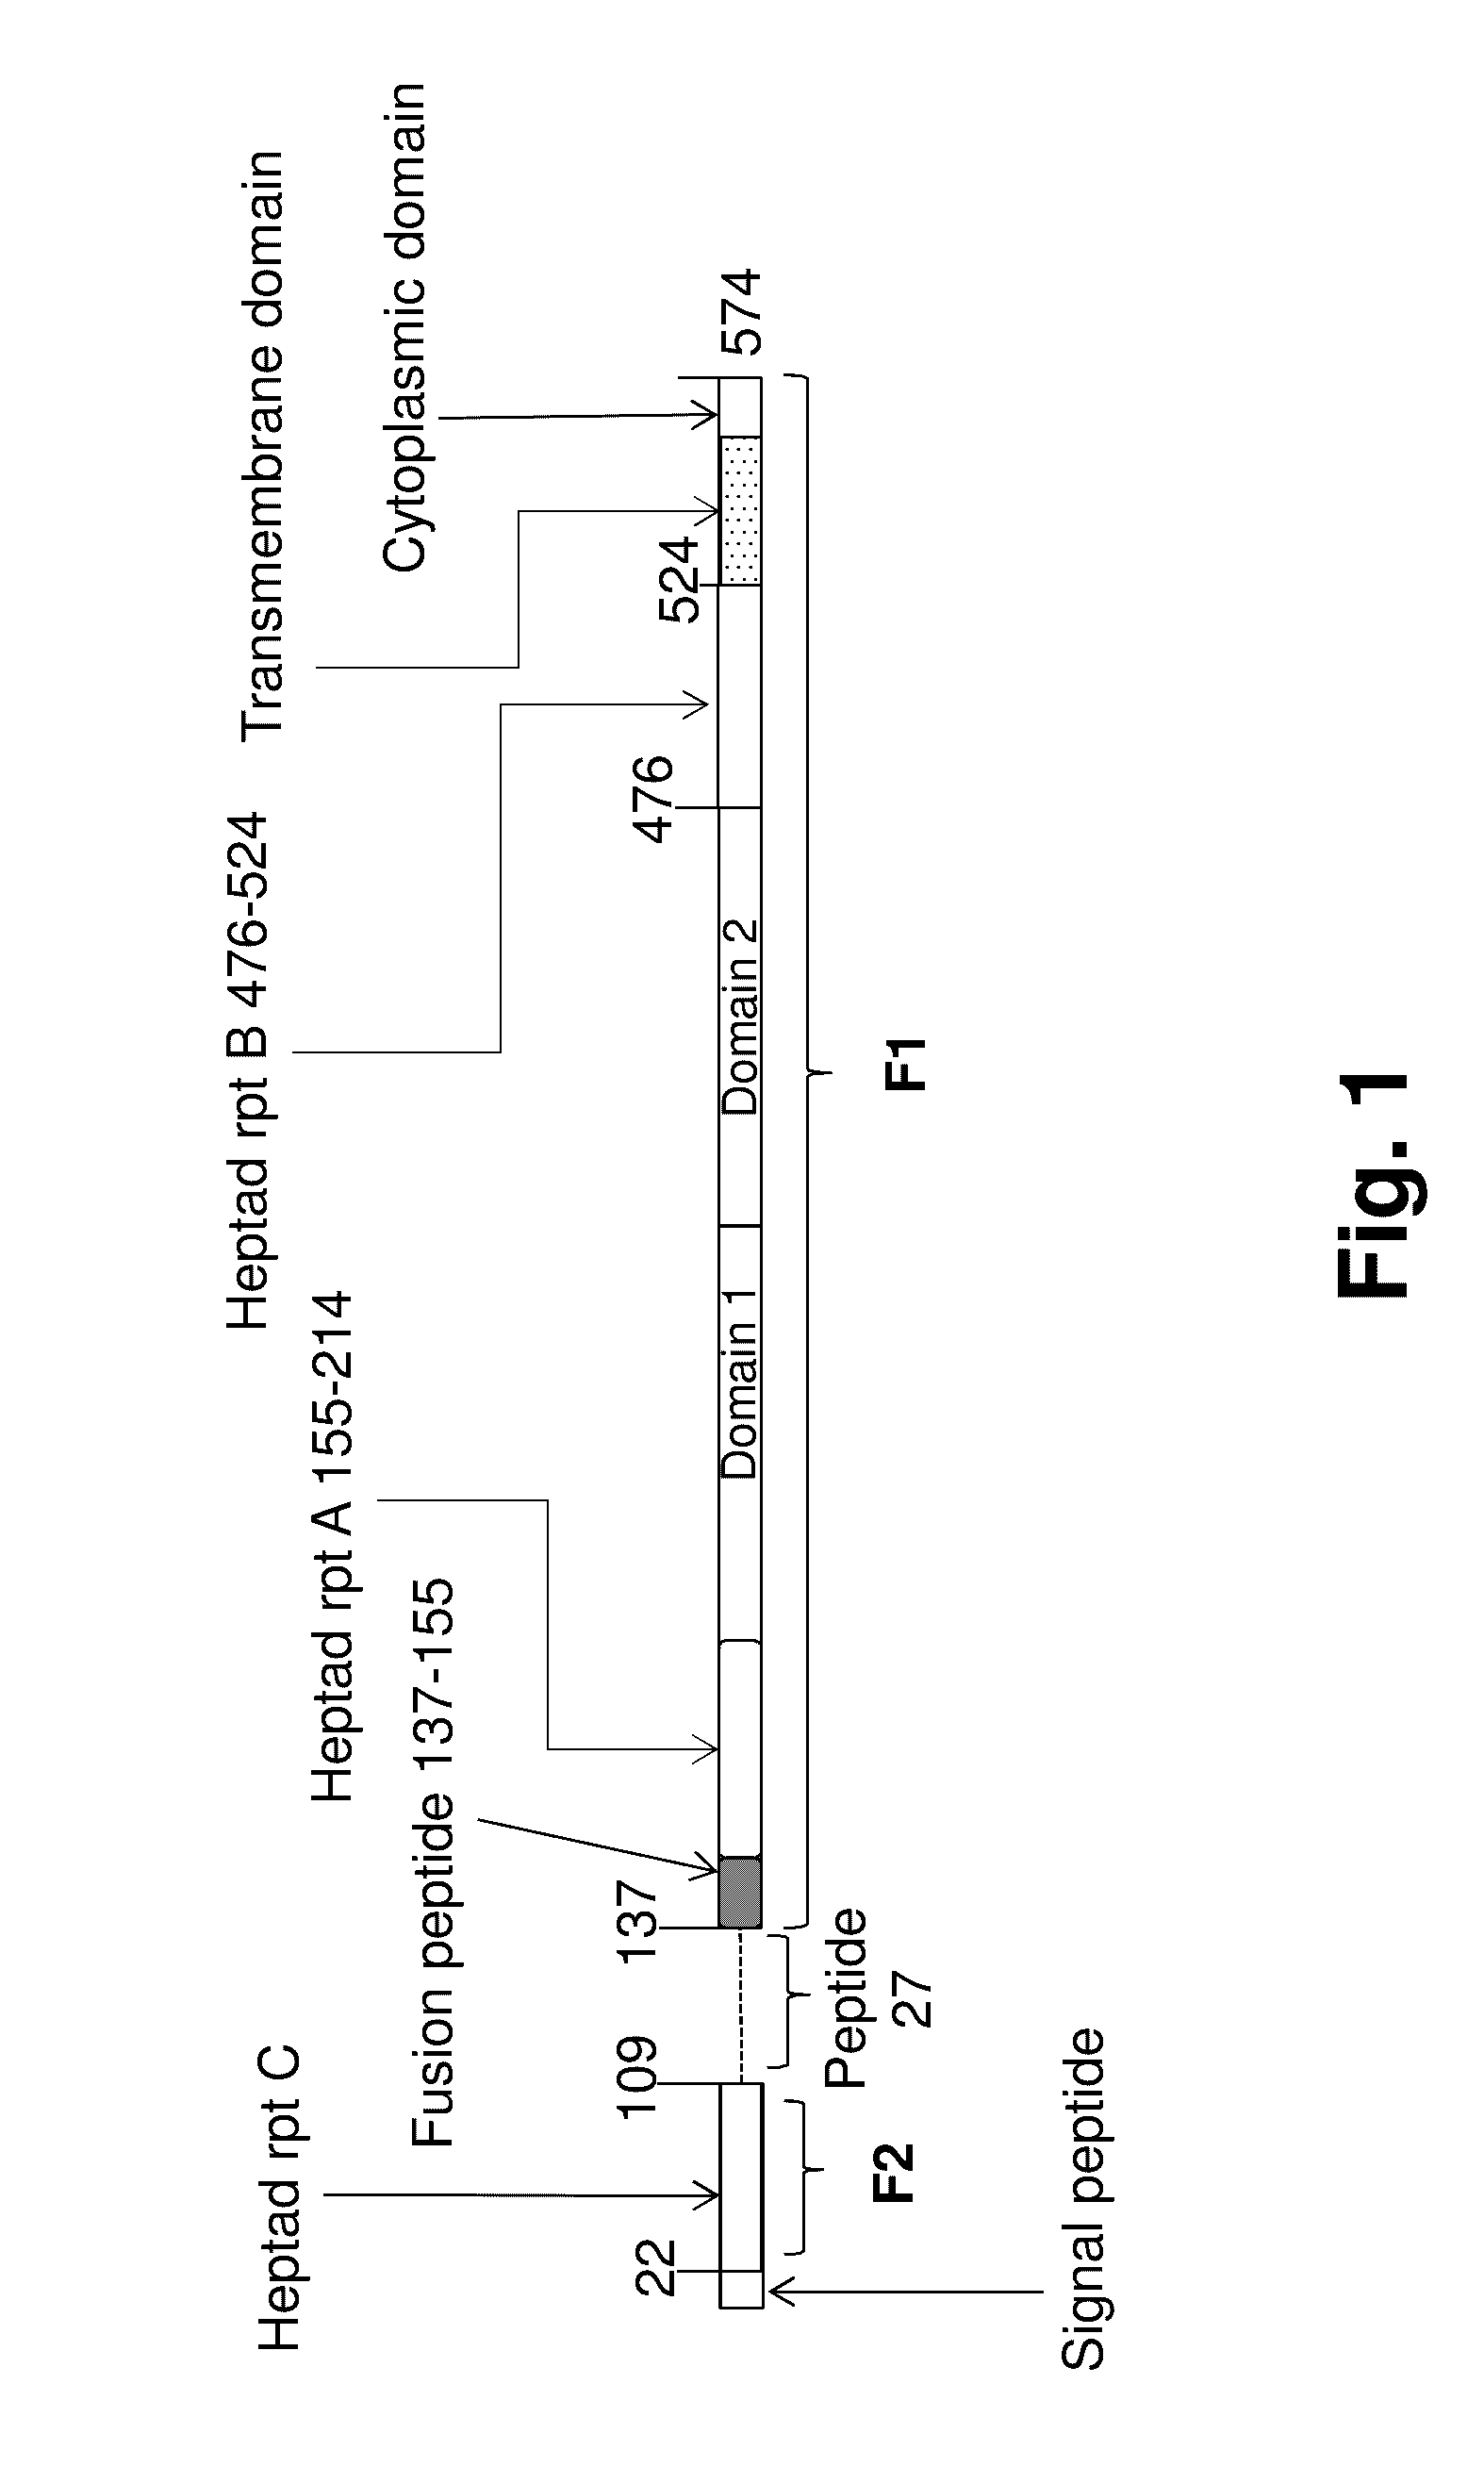 Human Antibodies to Respiratory Syncytial Virus F Protein and Methods of Use Thereof